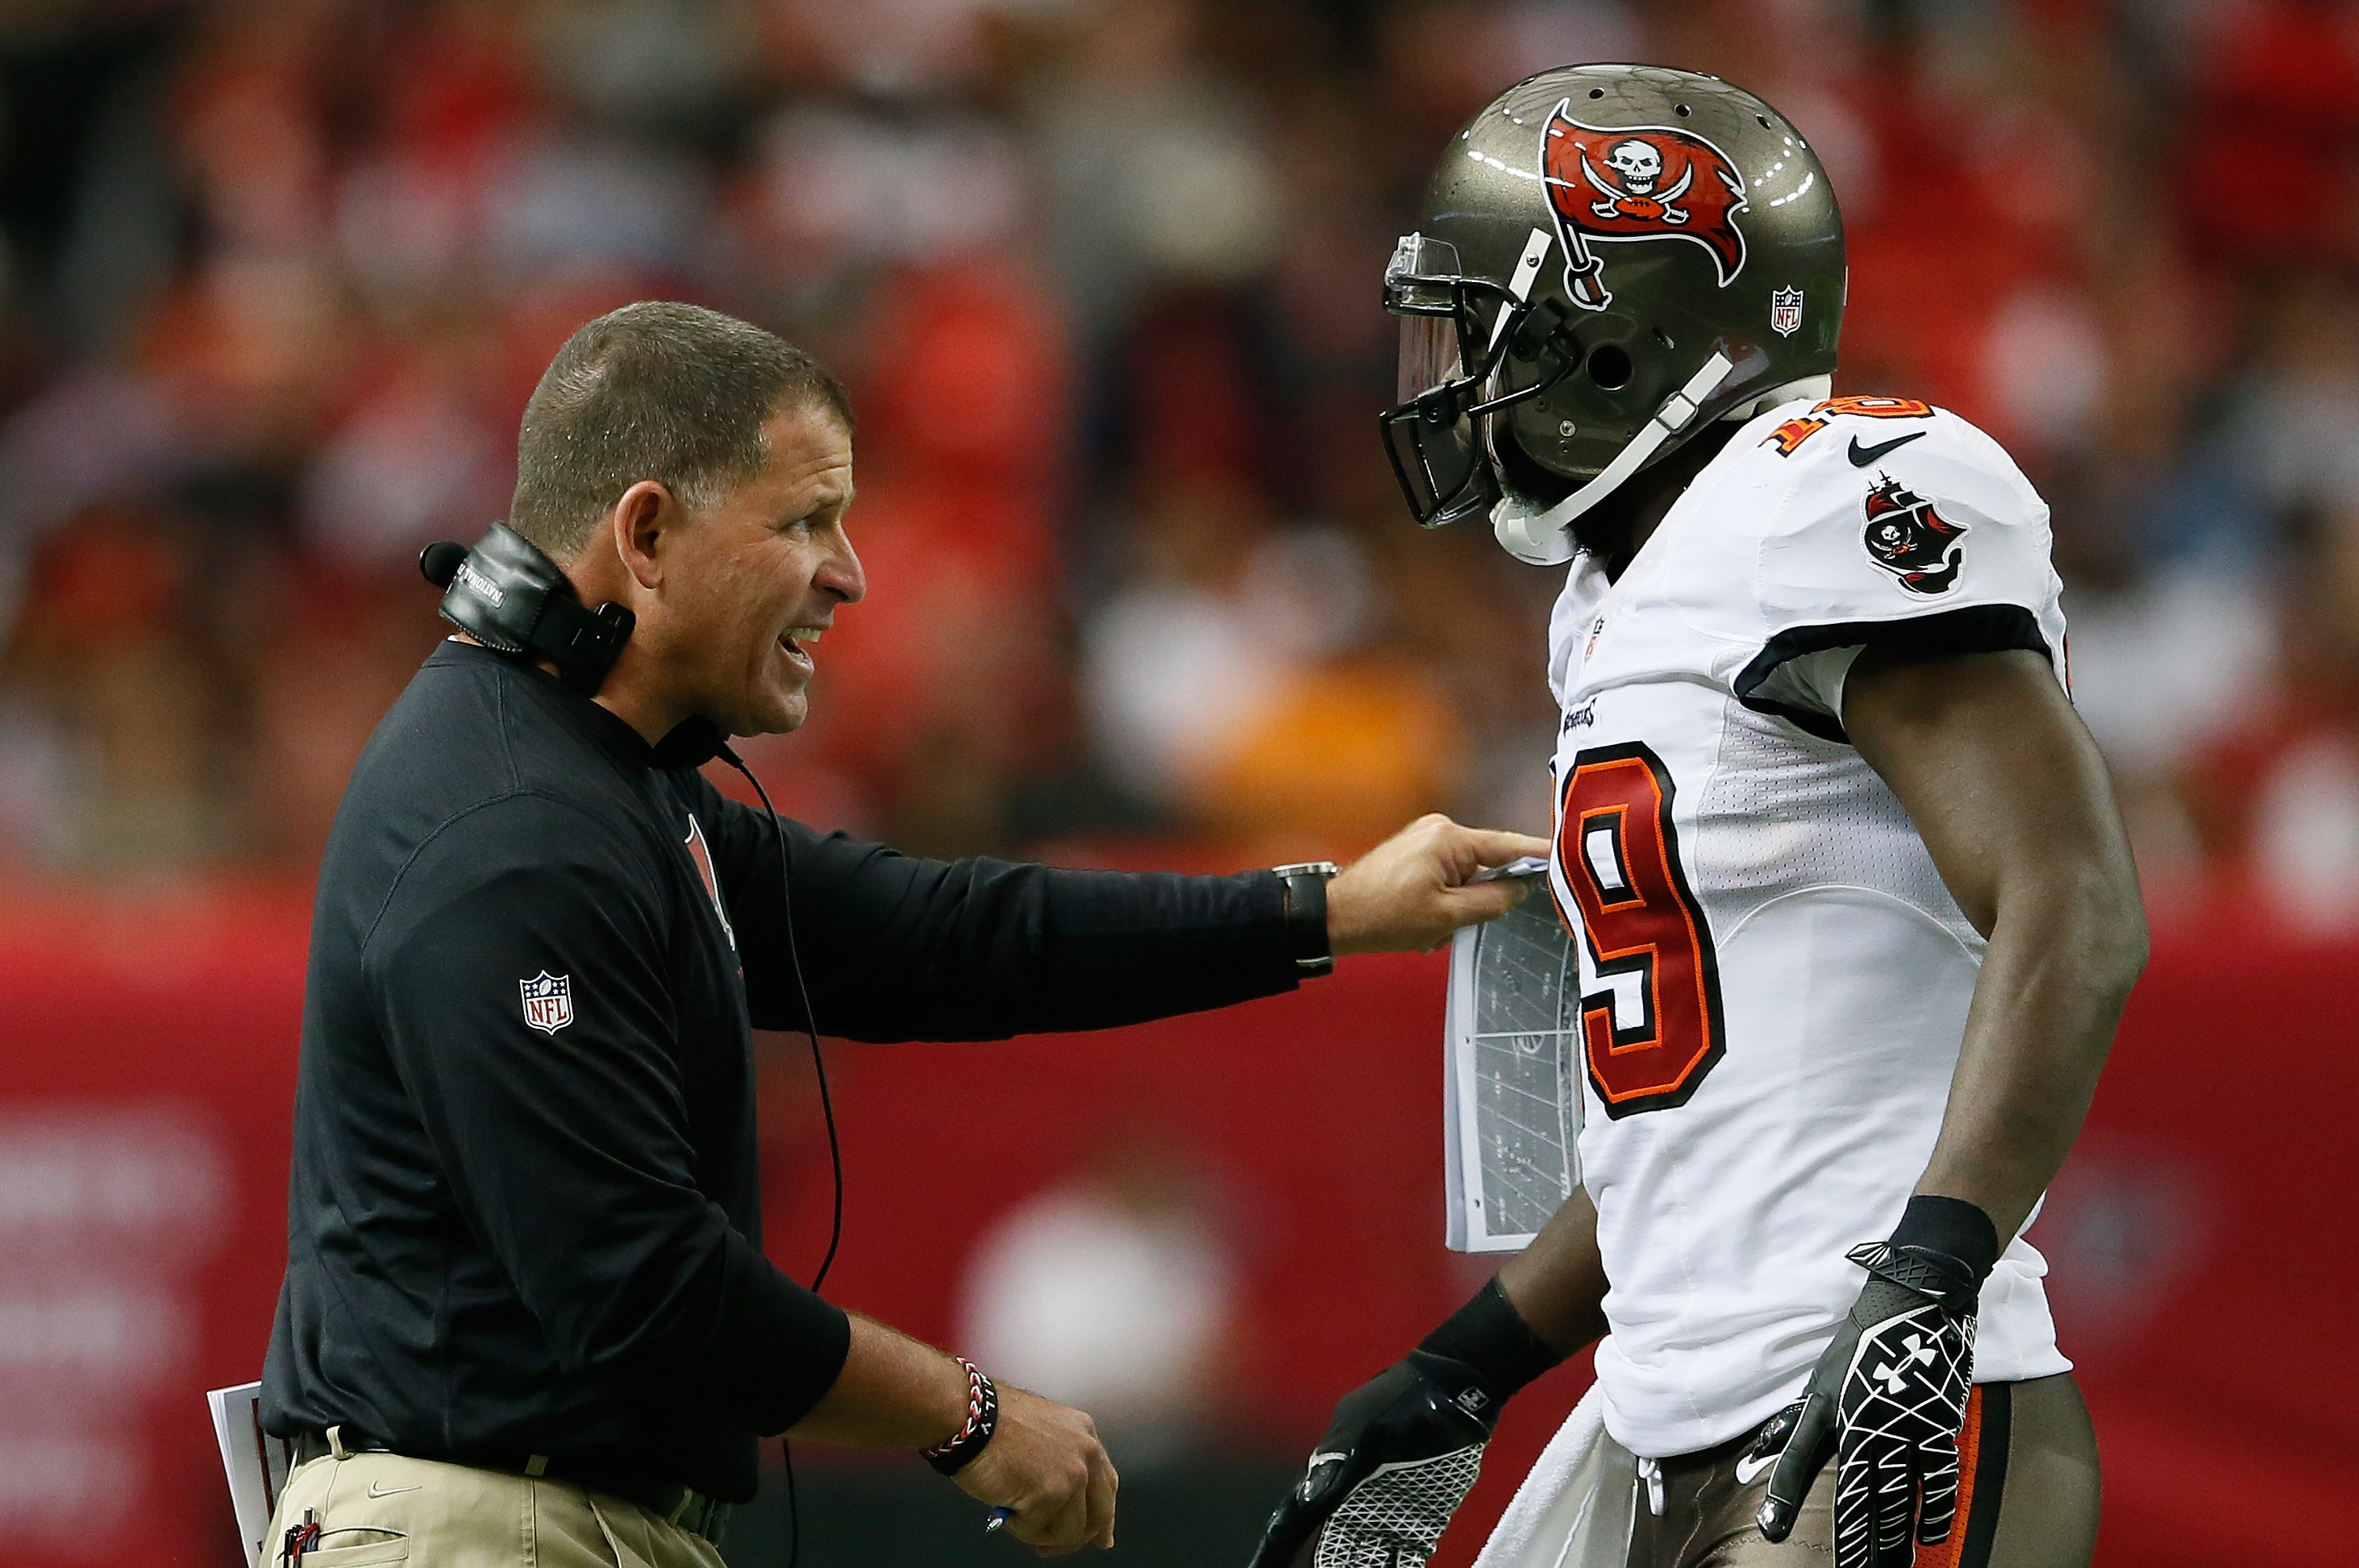 Tampa Bay Buccaneers Lose to the Carolina Panthers: Did Schiano Lose His Team?